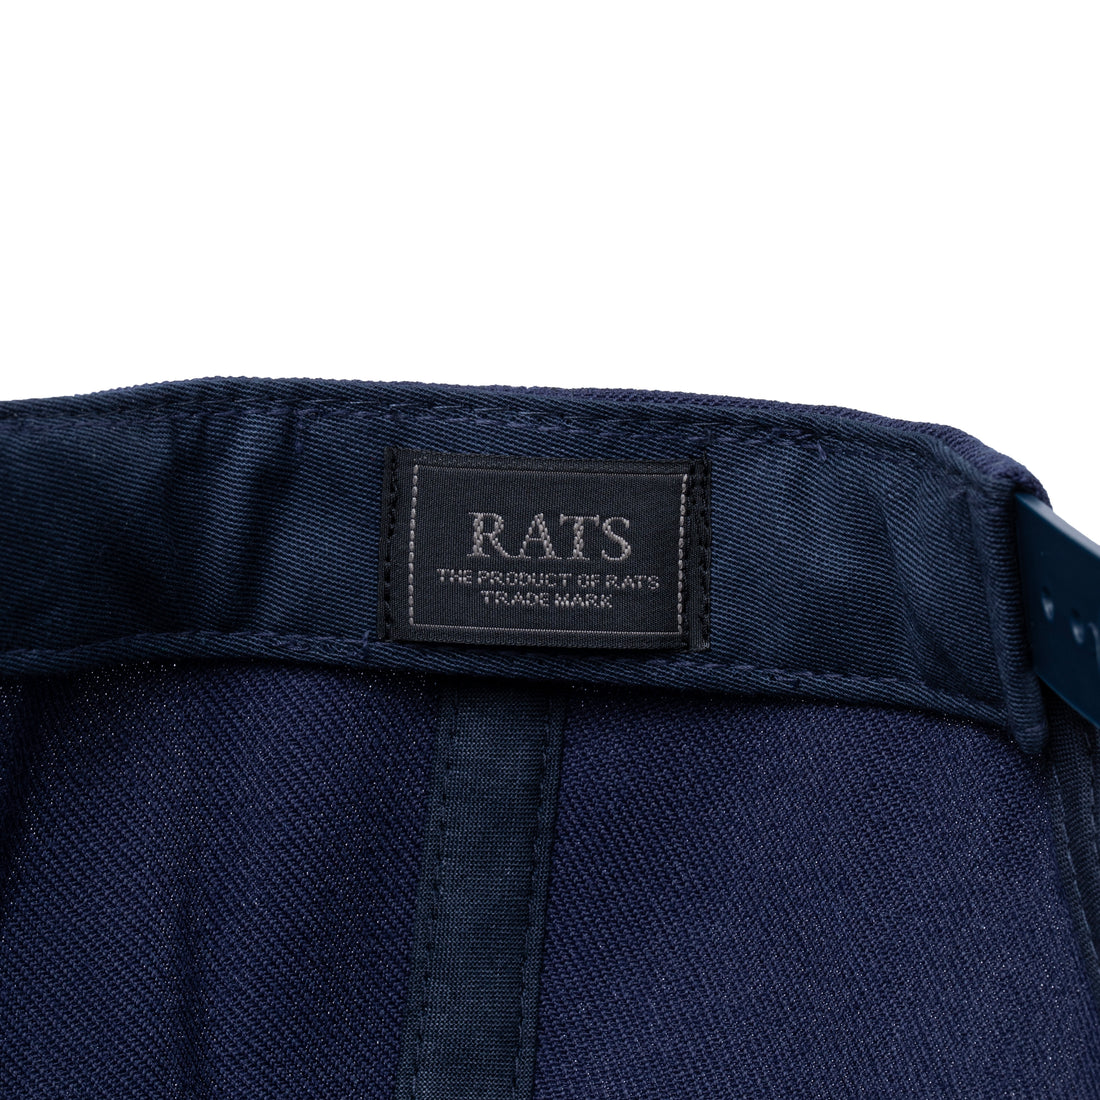 [RATS]EMBROIDERY CAP (WAY OF LIFE)/NAVY/PEARL BLUE